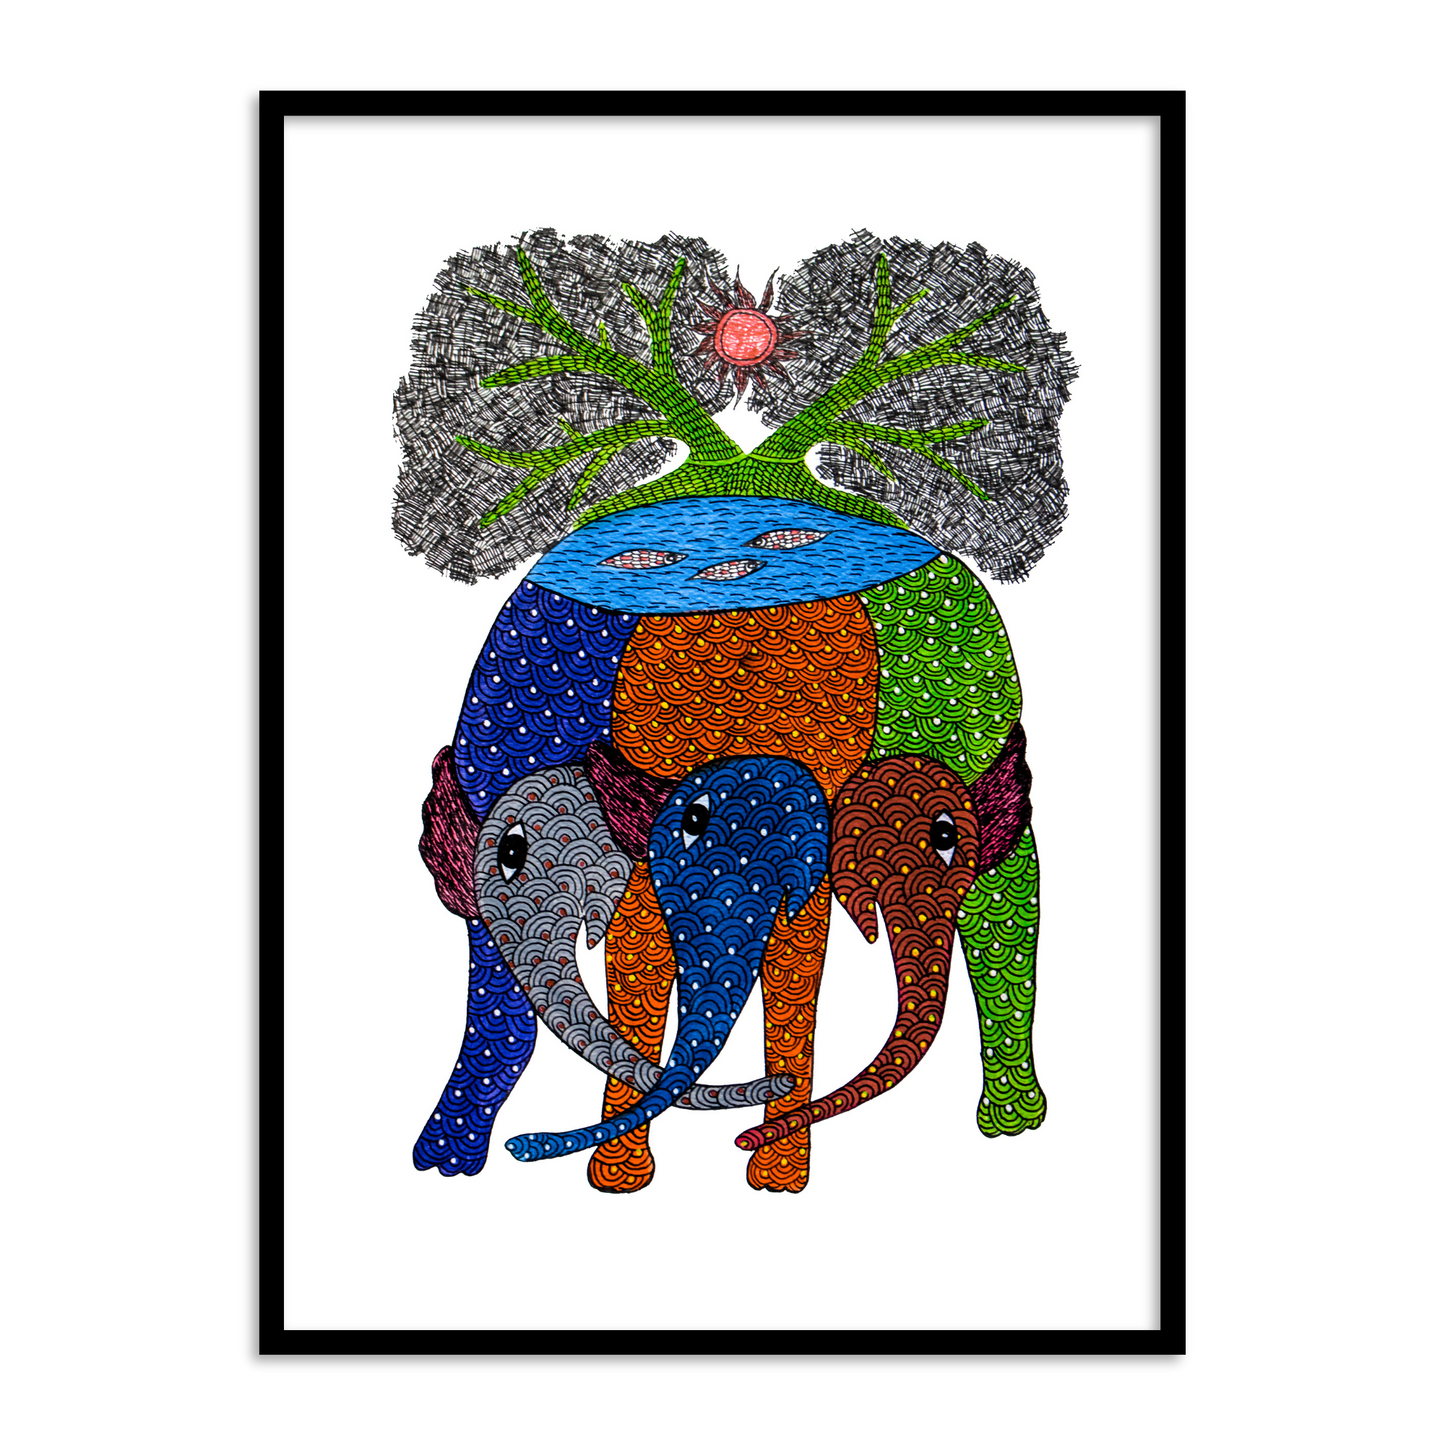 Beautiful Three Elephant Gond Art Painting for a Living Walls | Indian Art Framed